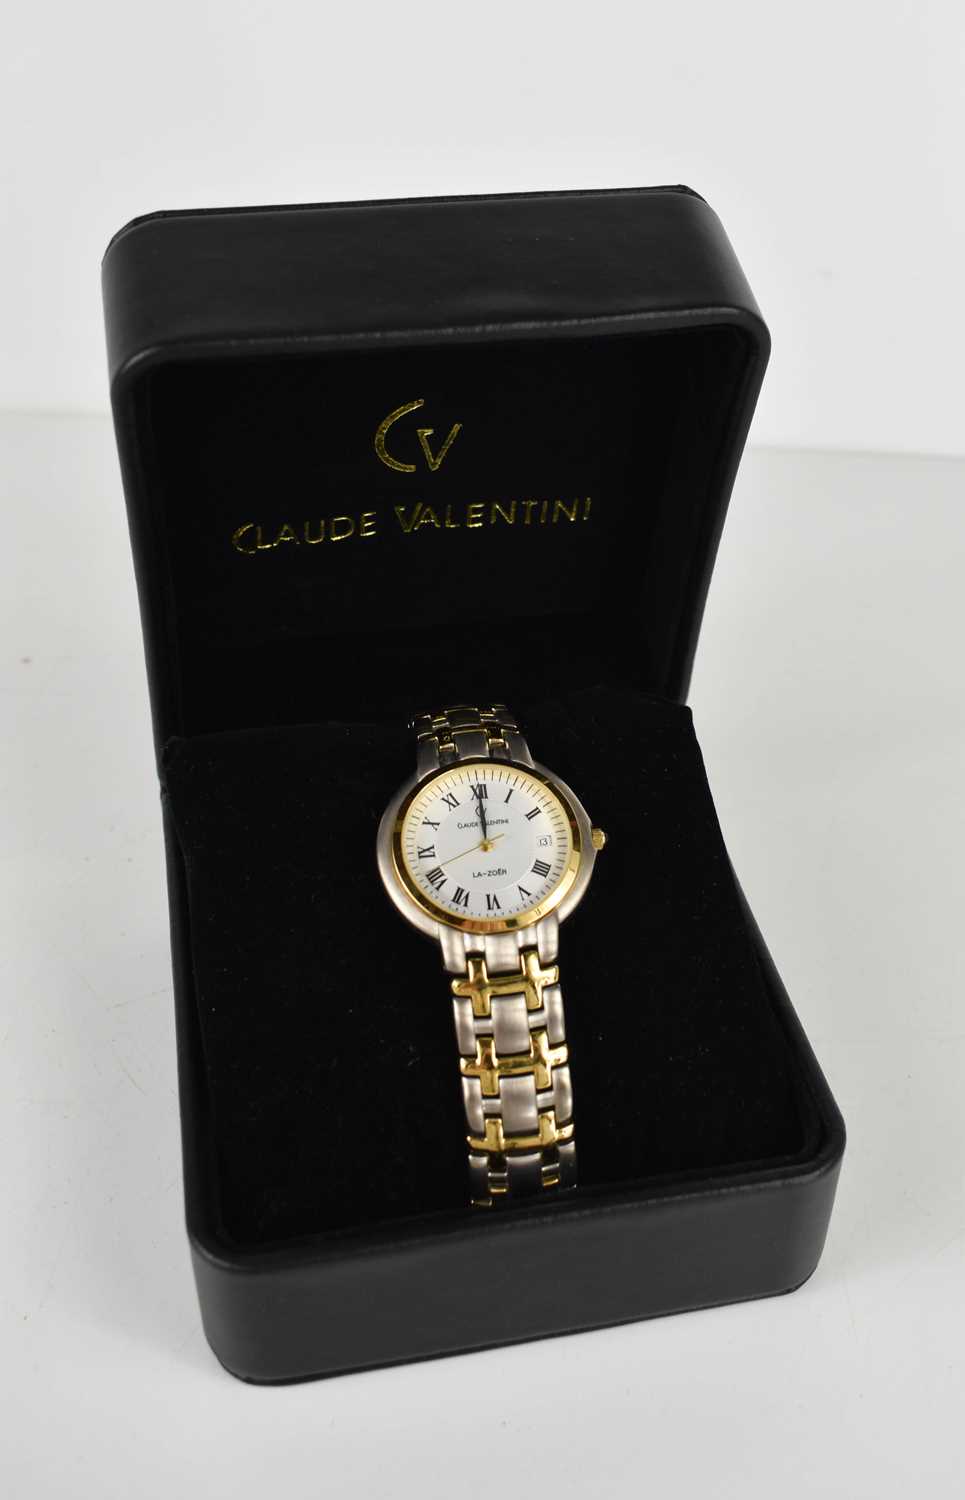 A Claude Valentini, La-Zoer, 18ct gold plated, gentleman's wristwatch, the signed dial with Roman